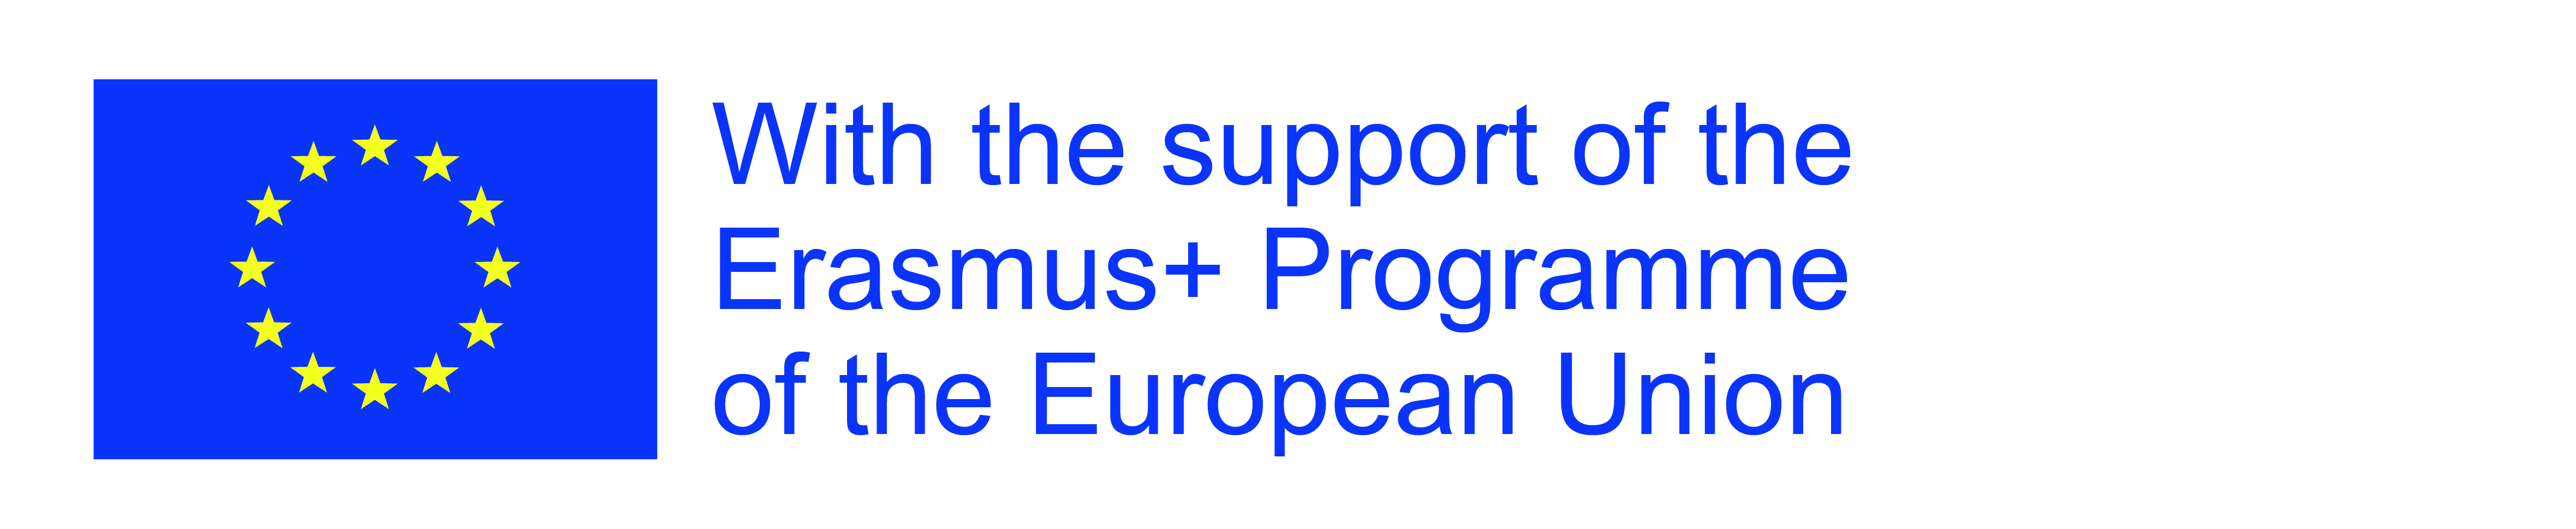 With the support of the Erasmus+ Programme